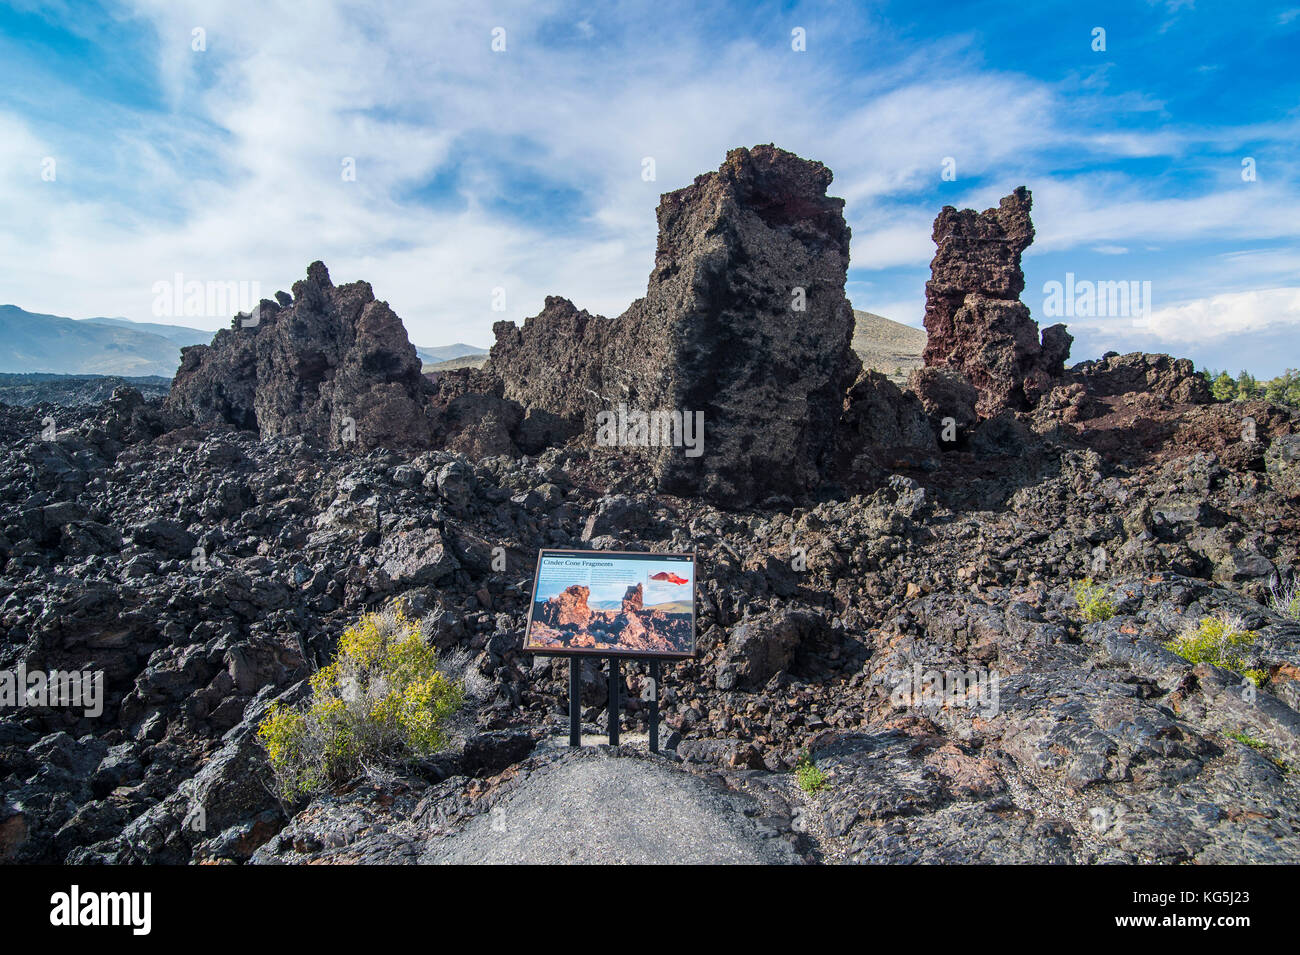 Cold lava walls in the Craters of the moon National Park, Idaho, USA Stock Photo